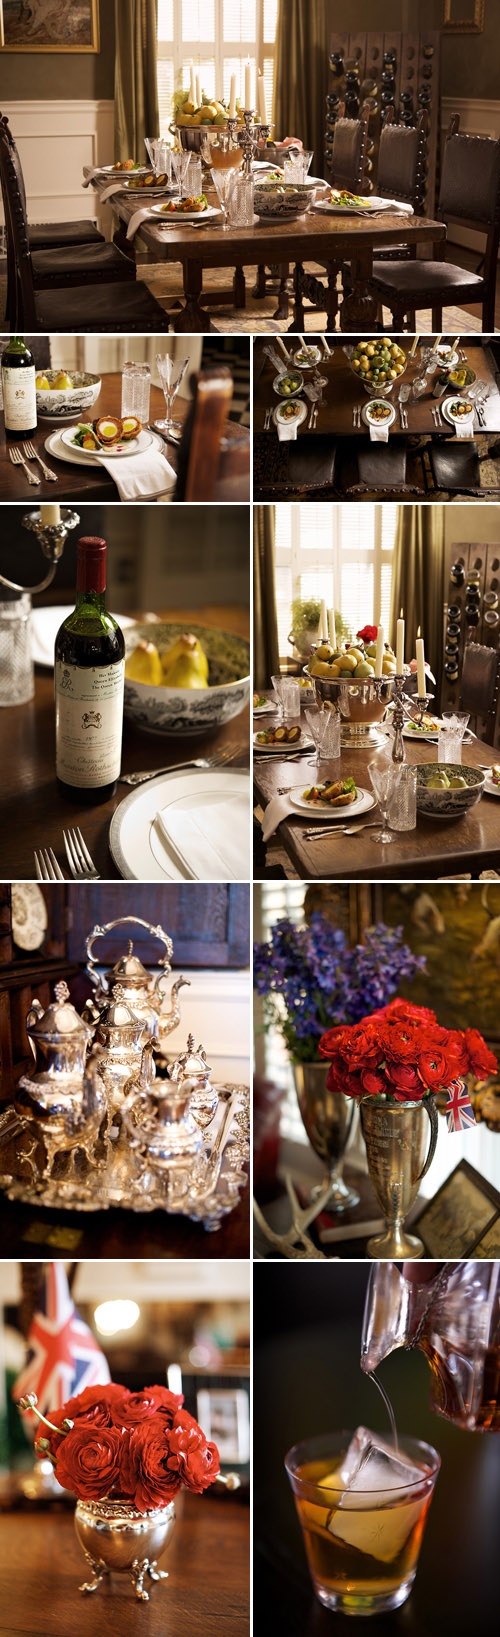 Sophisticated British mod engagement party inspiration photo shoot by Todd Scott Ballje of Beautiful Day Images and Lindsay Gibson of Gibson Events